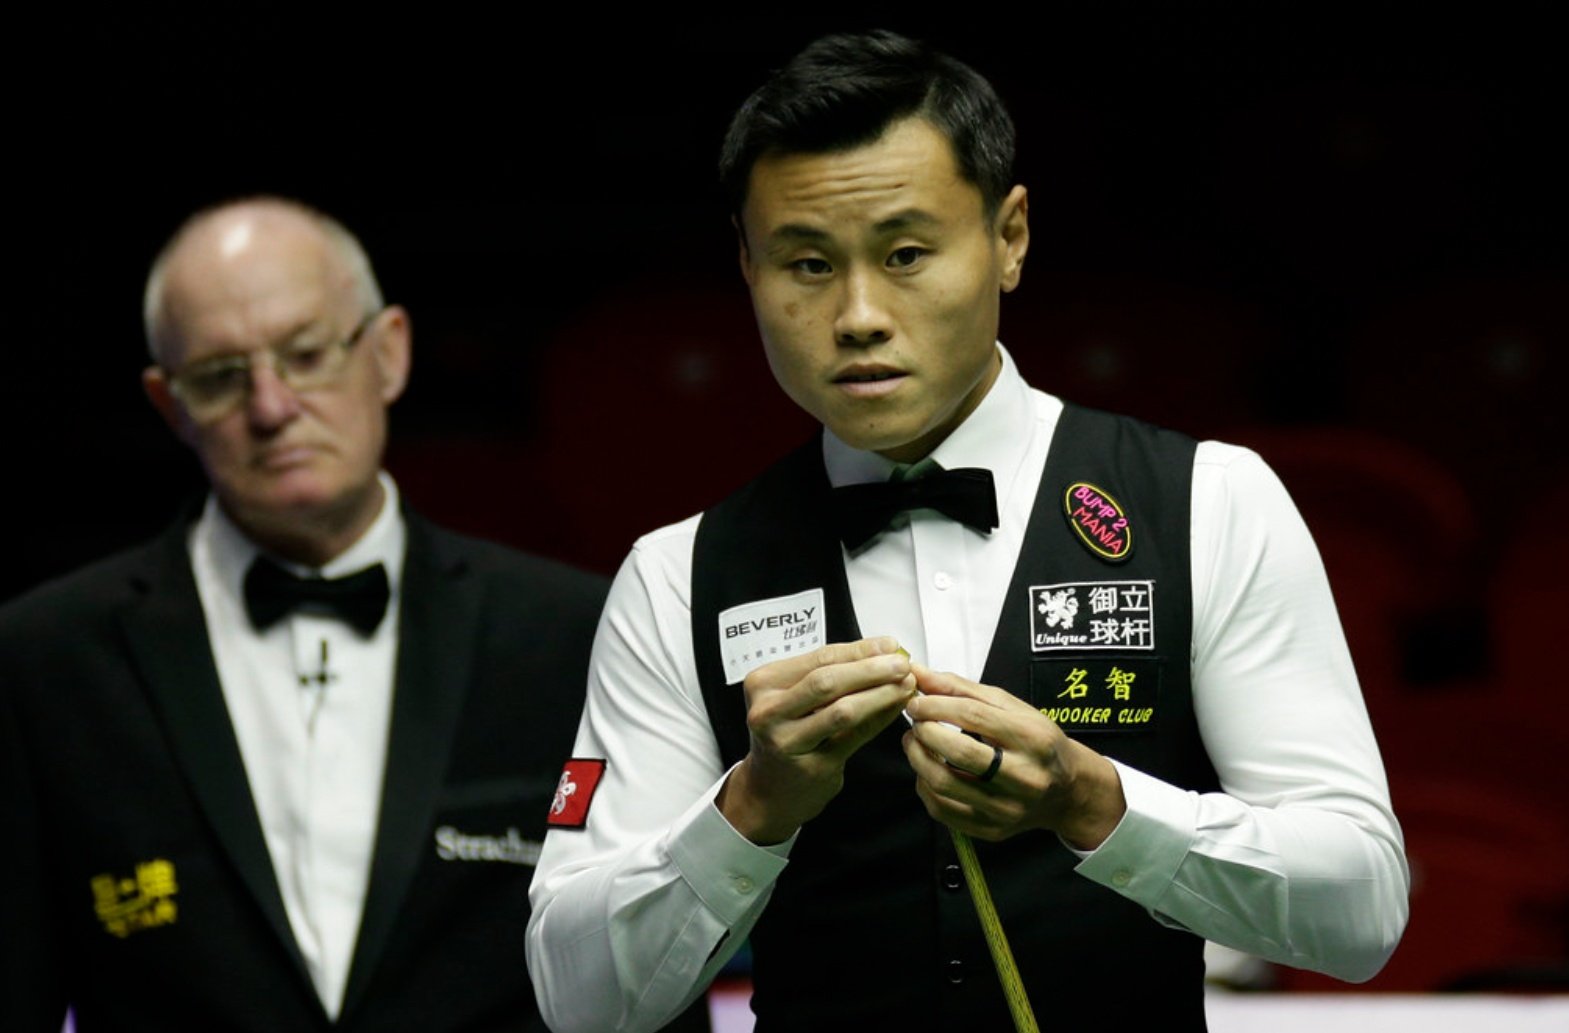 Hong Kongs Andy Lee bows out of snookers 6 Red World Championship qualifiers, blames delayed start for loss of focus South China Morning Post